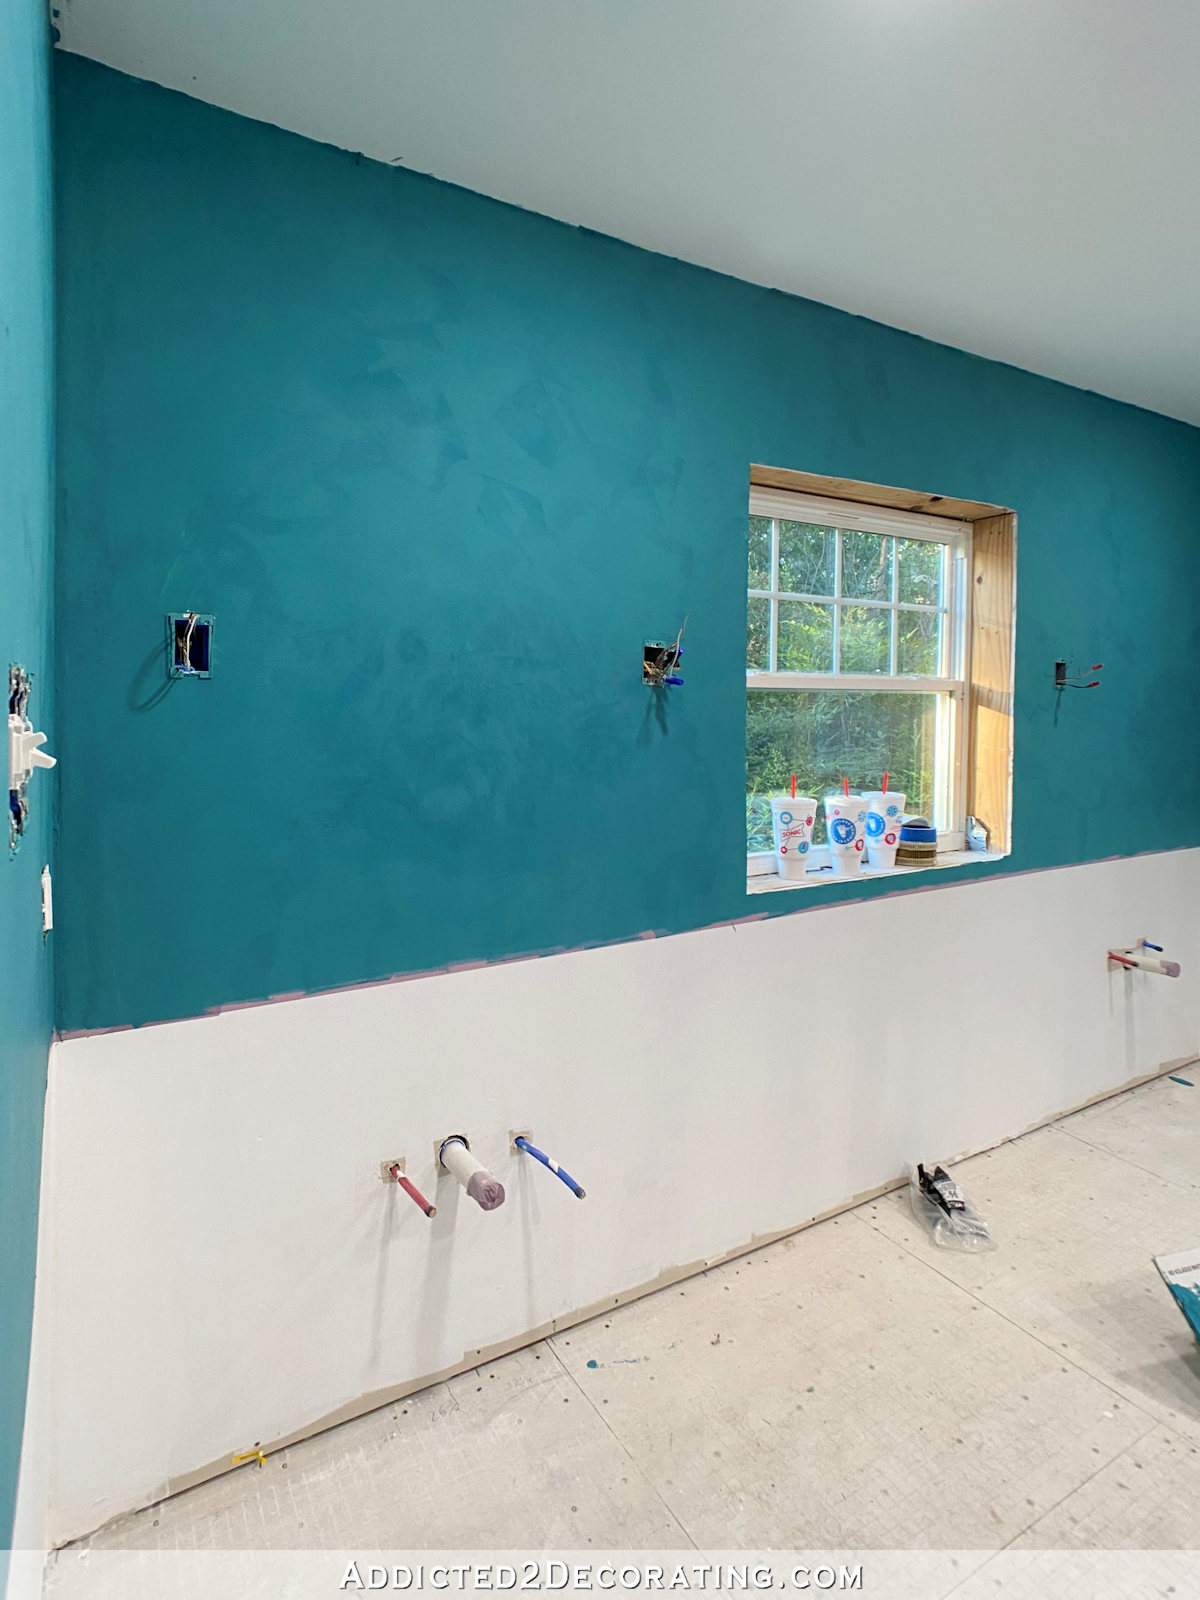 master bathroom walls with venetian plaster finish in dark turquoise teal - 5